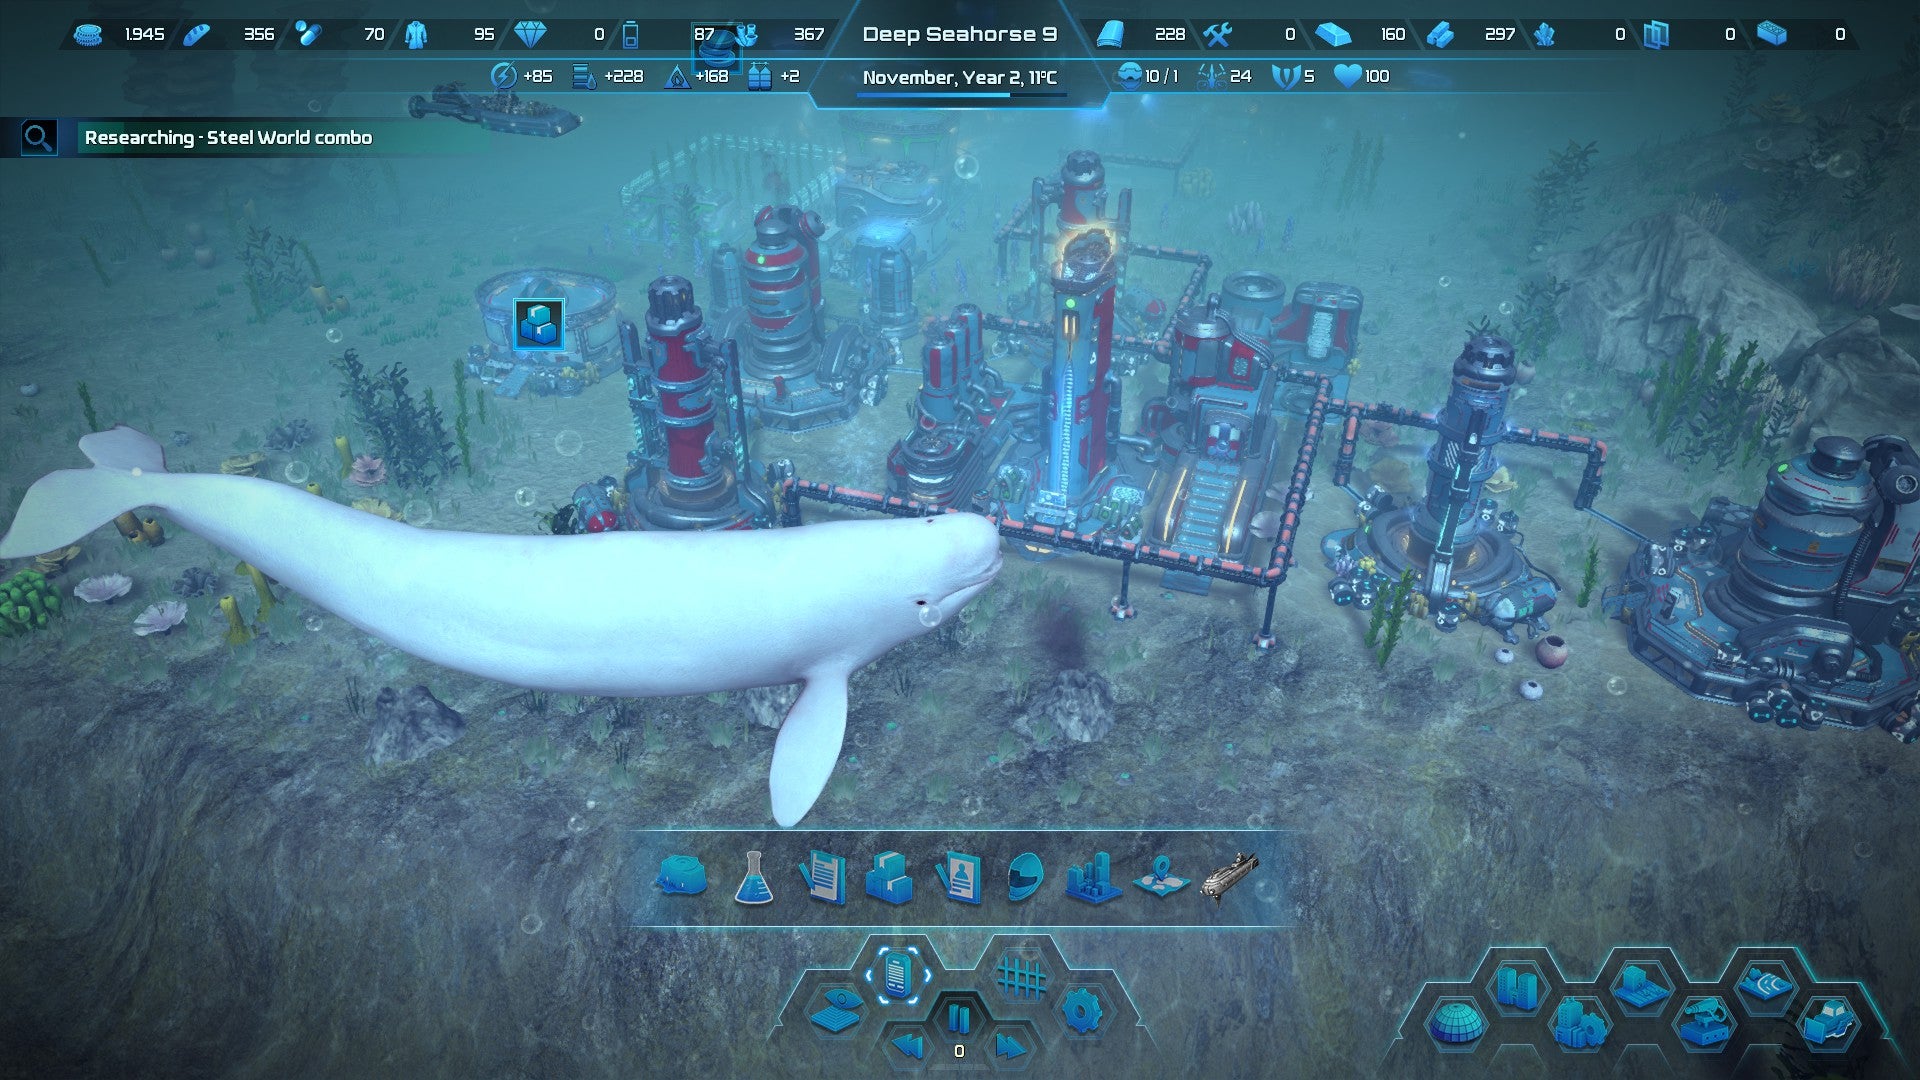 An Aquatico screenshot showing a white whale swing past an underwater city.